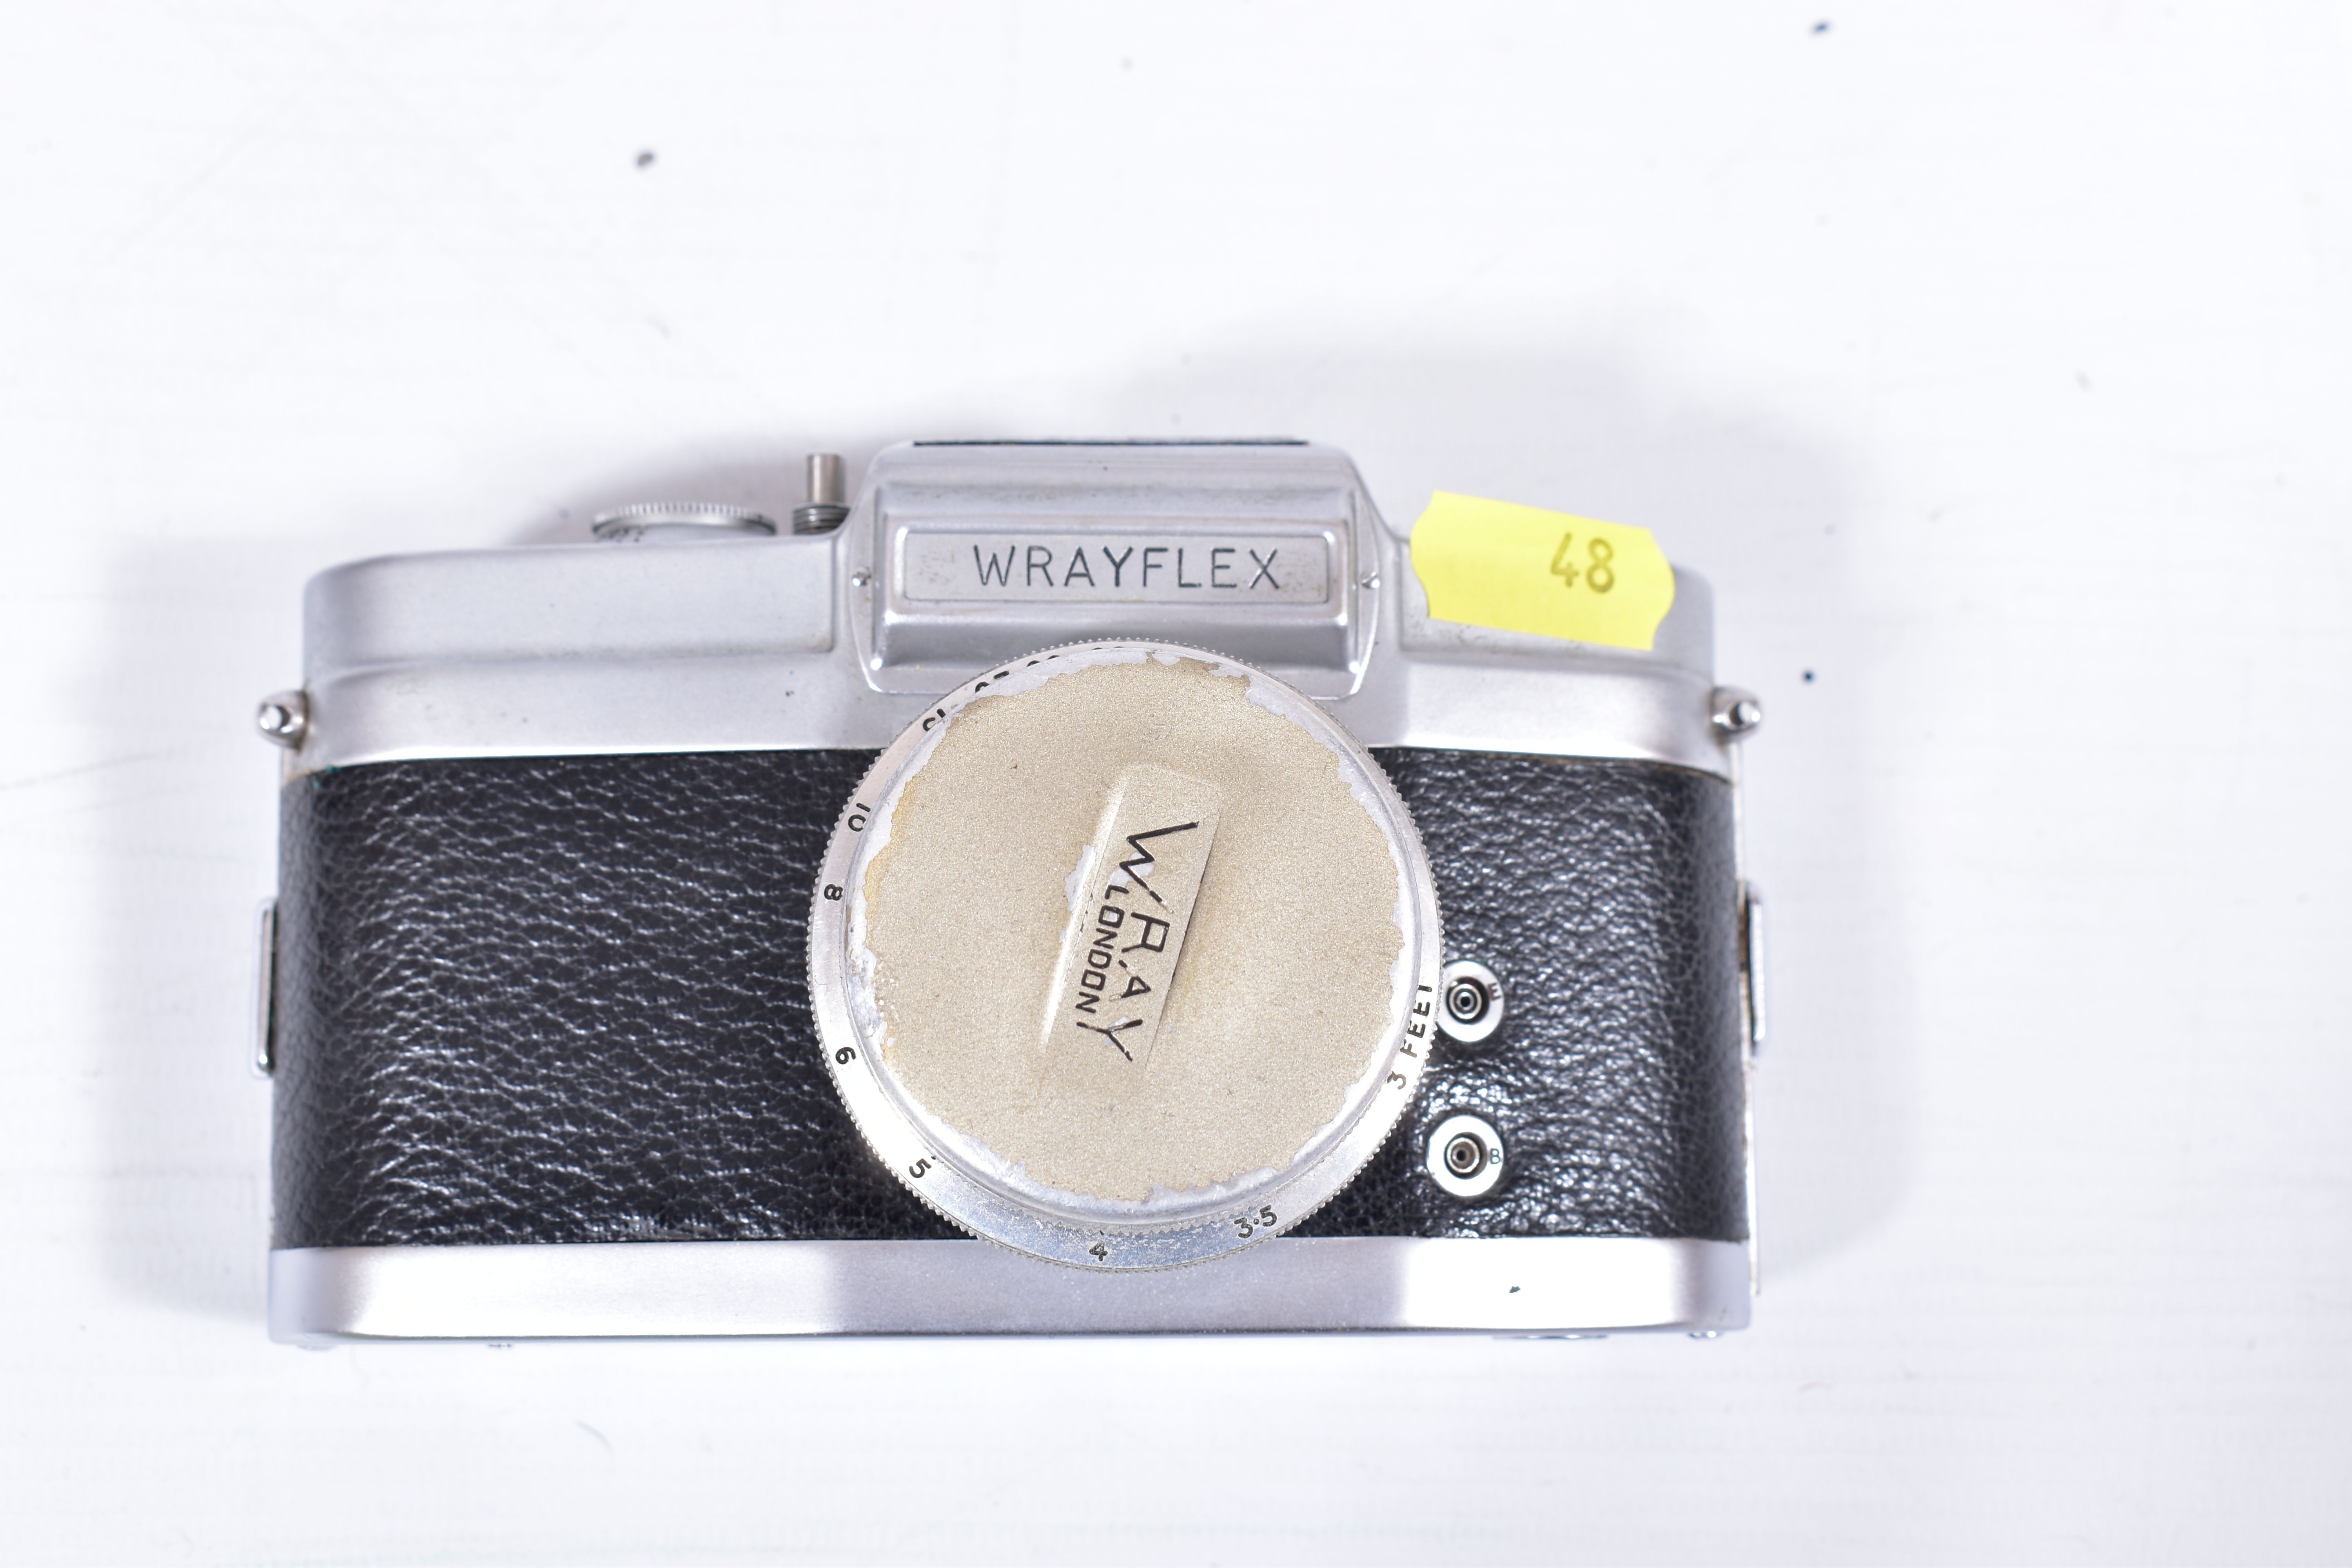 A WRAYFLEX 1 FILM CAMERA fitted with a Wray 50mm f2.8 lens , a Zeiss Ikon Contessa Nettel Picolette, - Image 7 of 8